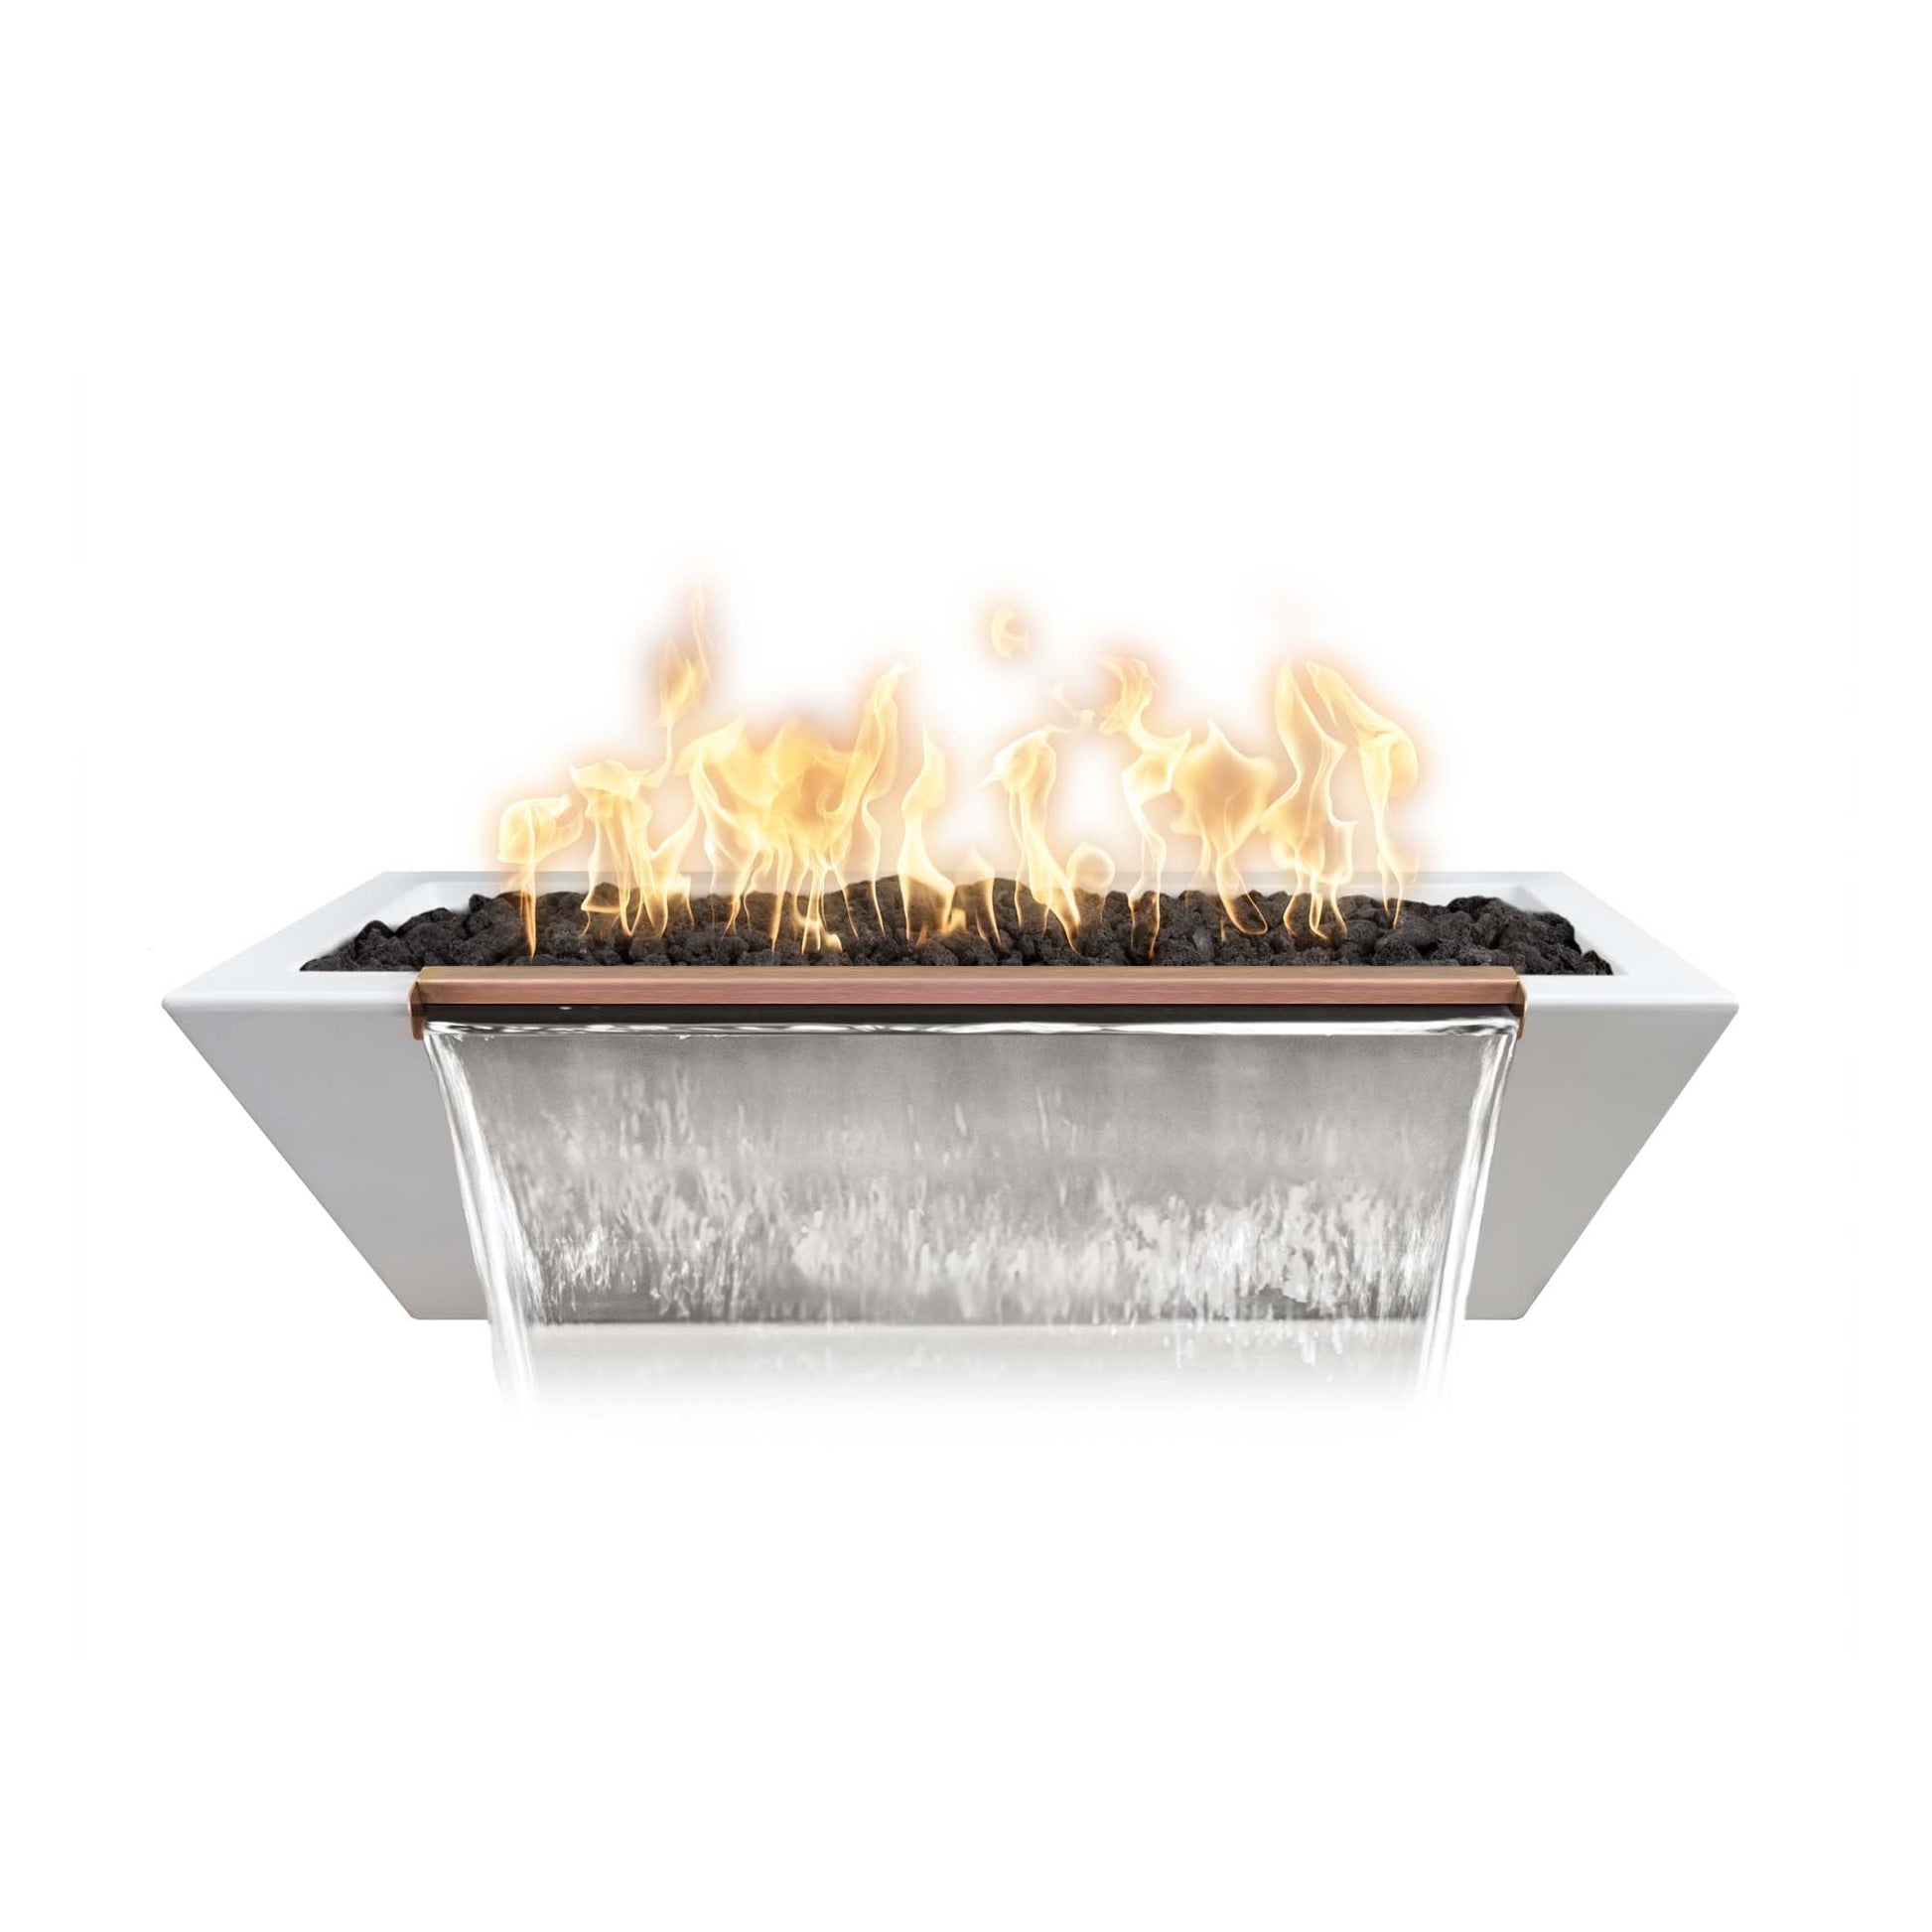 The Outdoor Plus Linear Maya 72" Metallic Silver GFRC Concrete Natural Gas Fire & Water Bowl with Match Lit Ignition